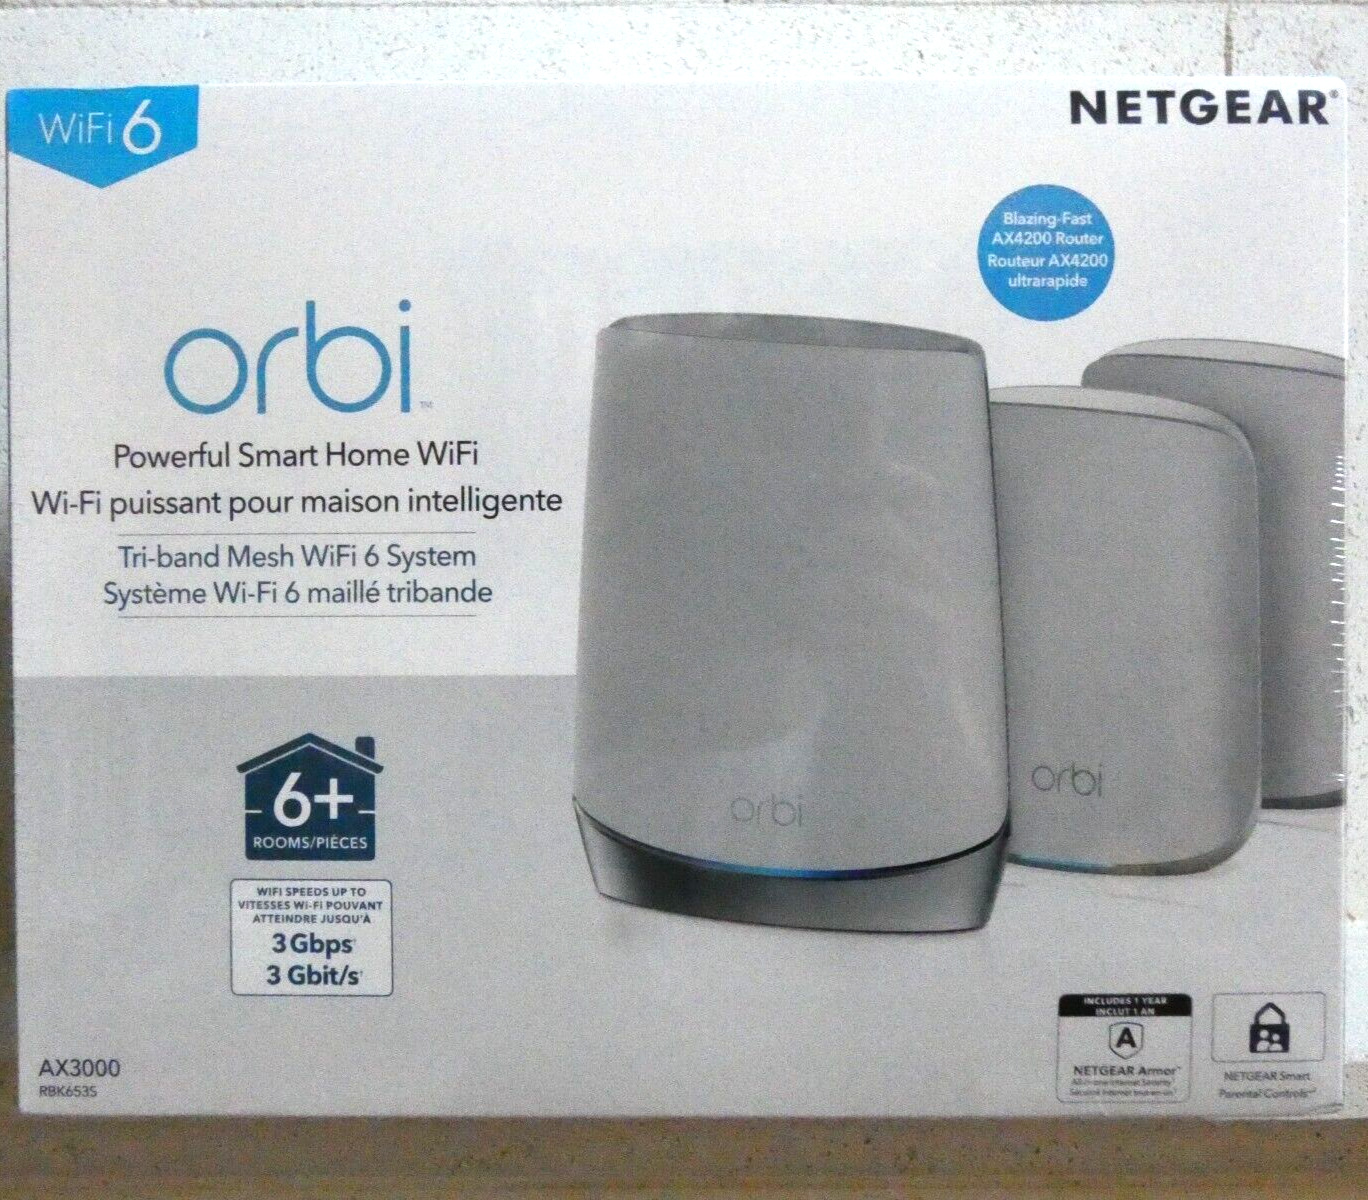 NETGEAR Orbi Whole Home Tri-Band Mesh WiFi 6 System Router with 2 Satellites ✅✅✅